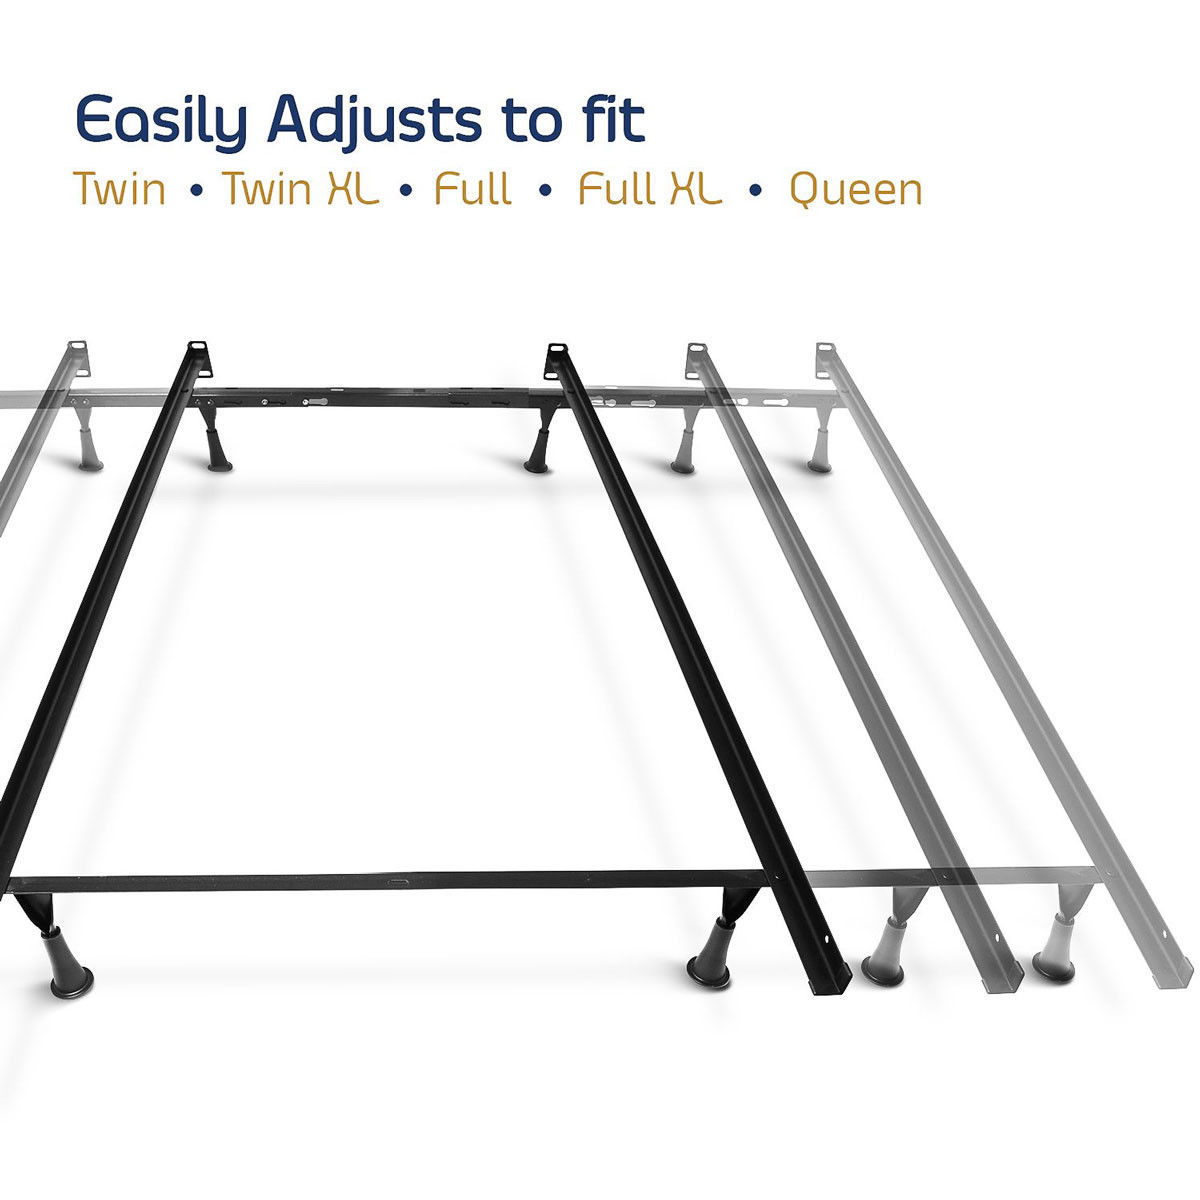 Can this bedframe piece adjust to fit all bed sizes?